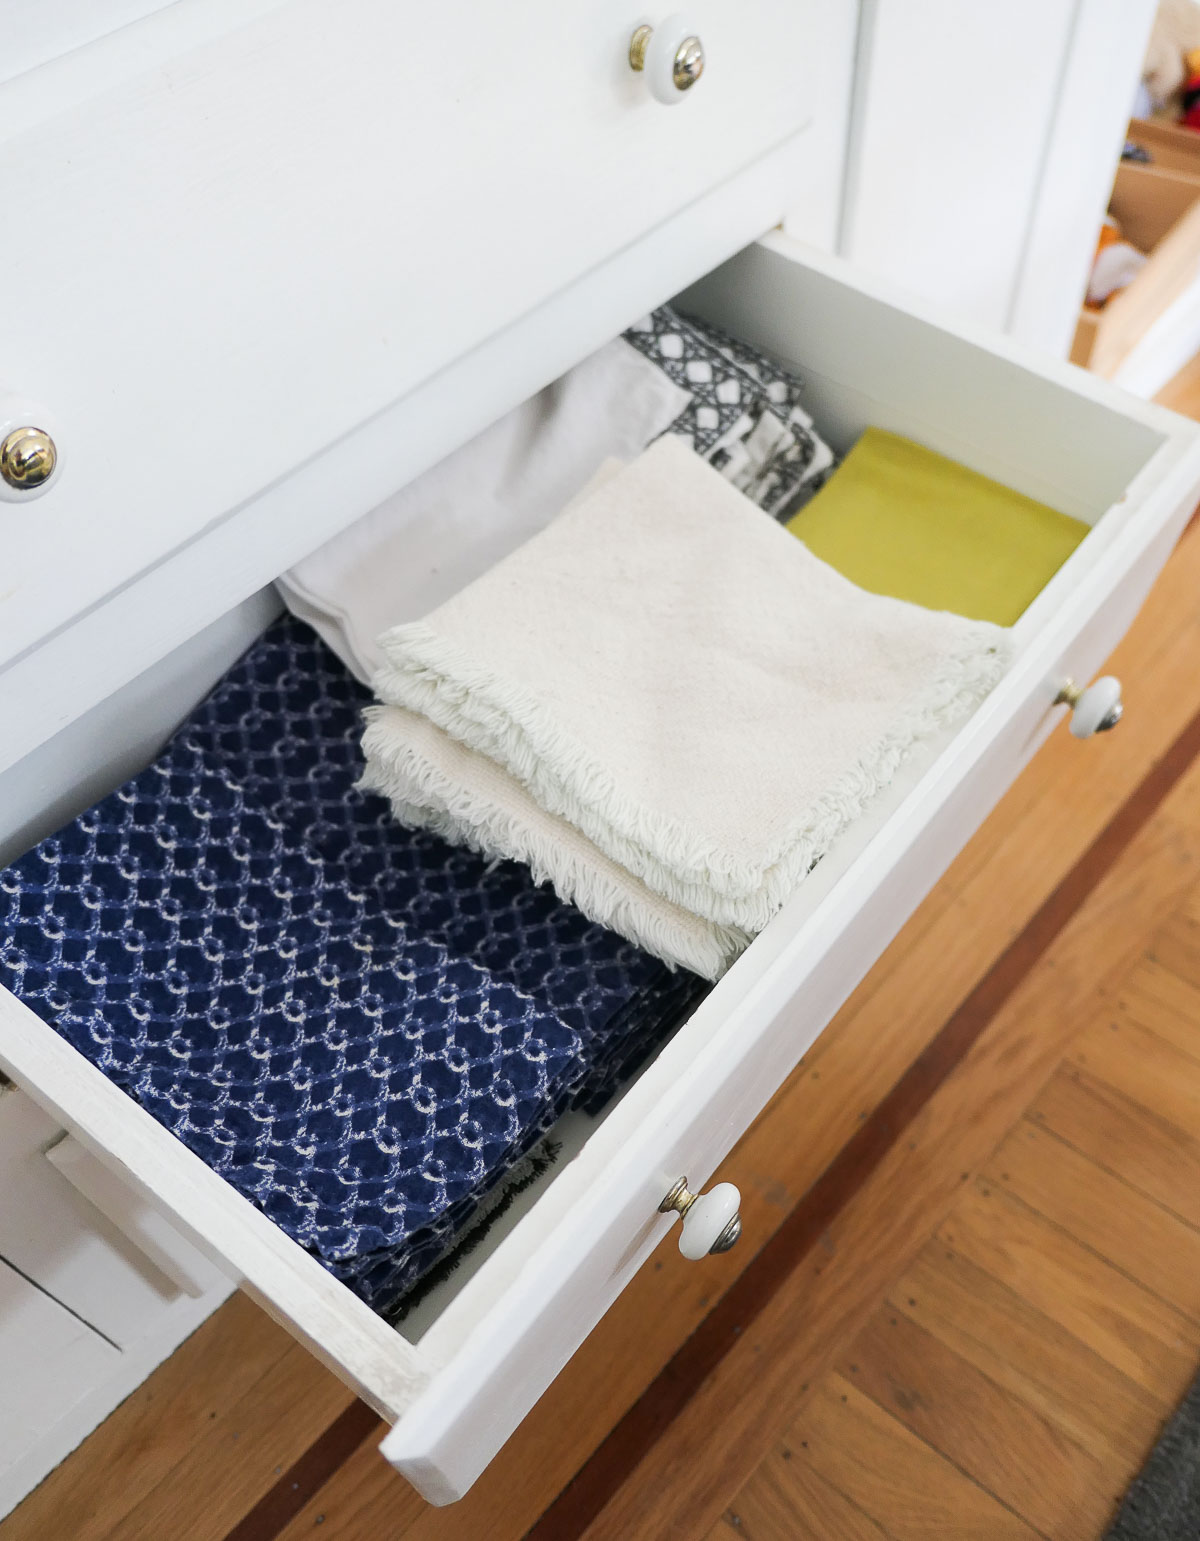 Cloth Napkins in Drawer - How to Stop Using Paper Towels